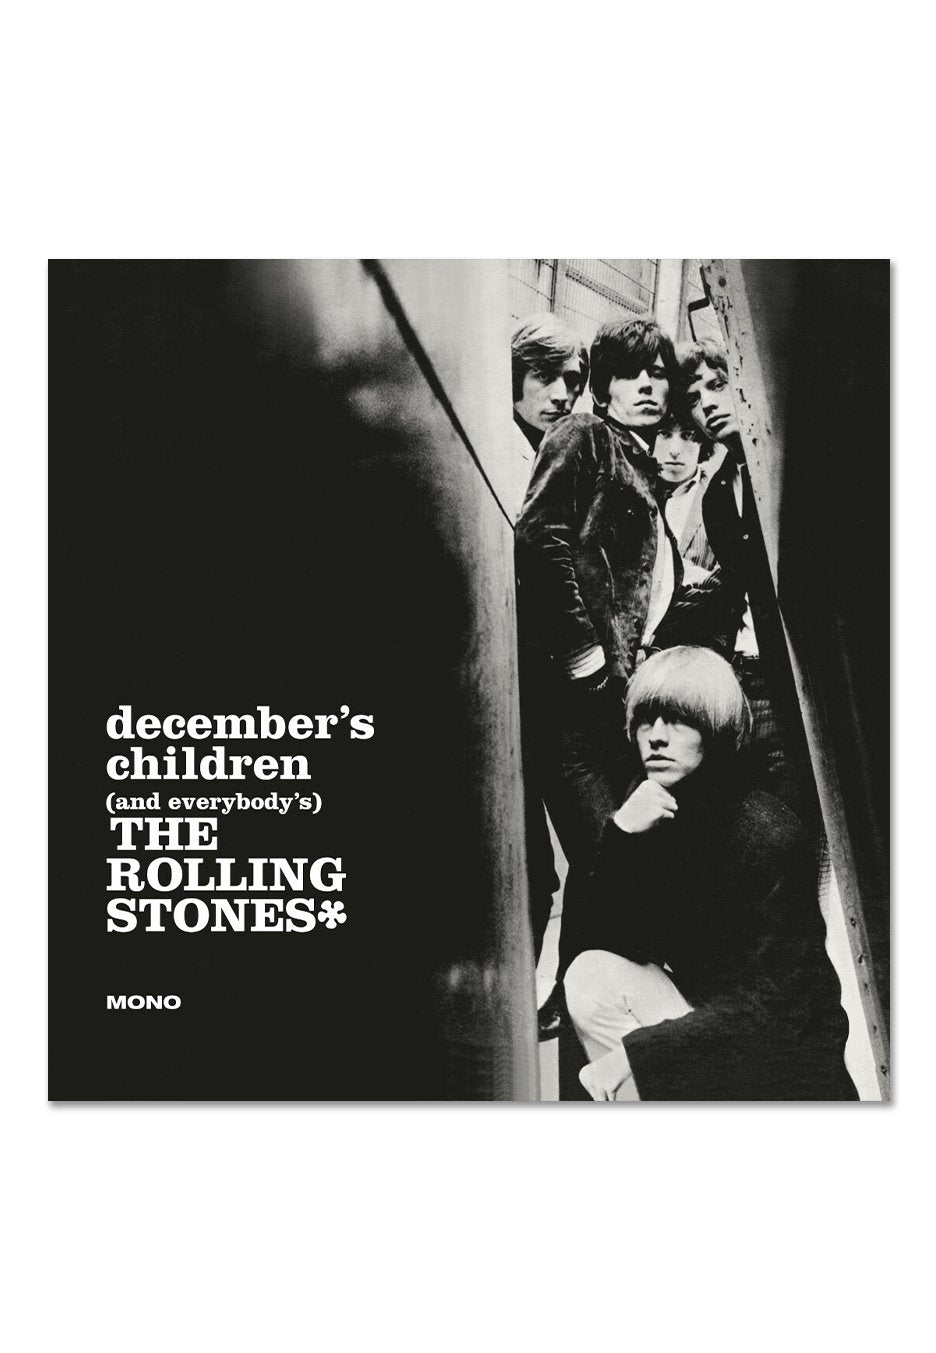 The Rolling Stones - December's Children (And Everybody's) US-Version - Vinyl